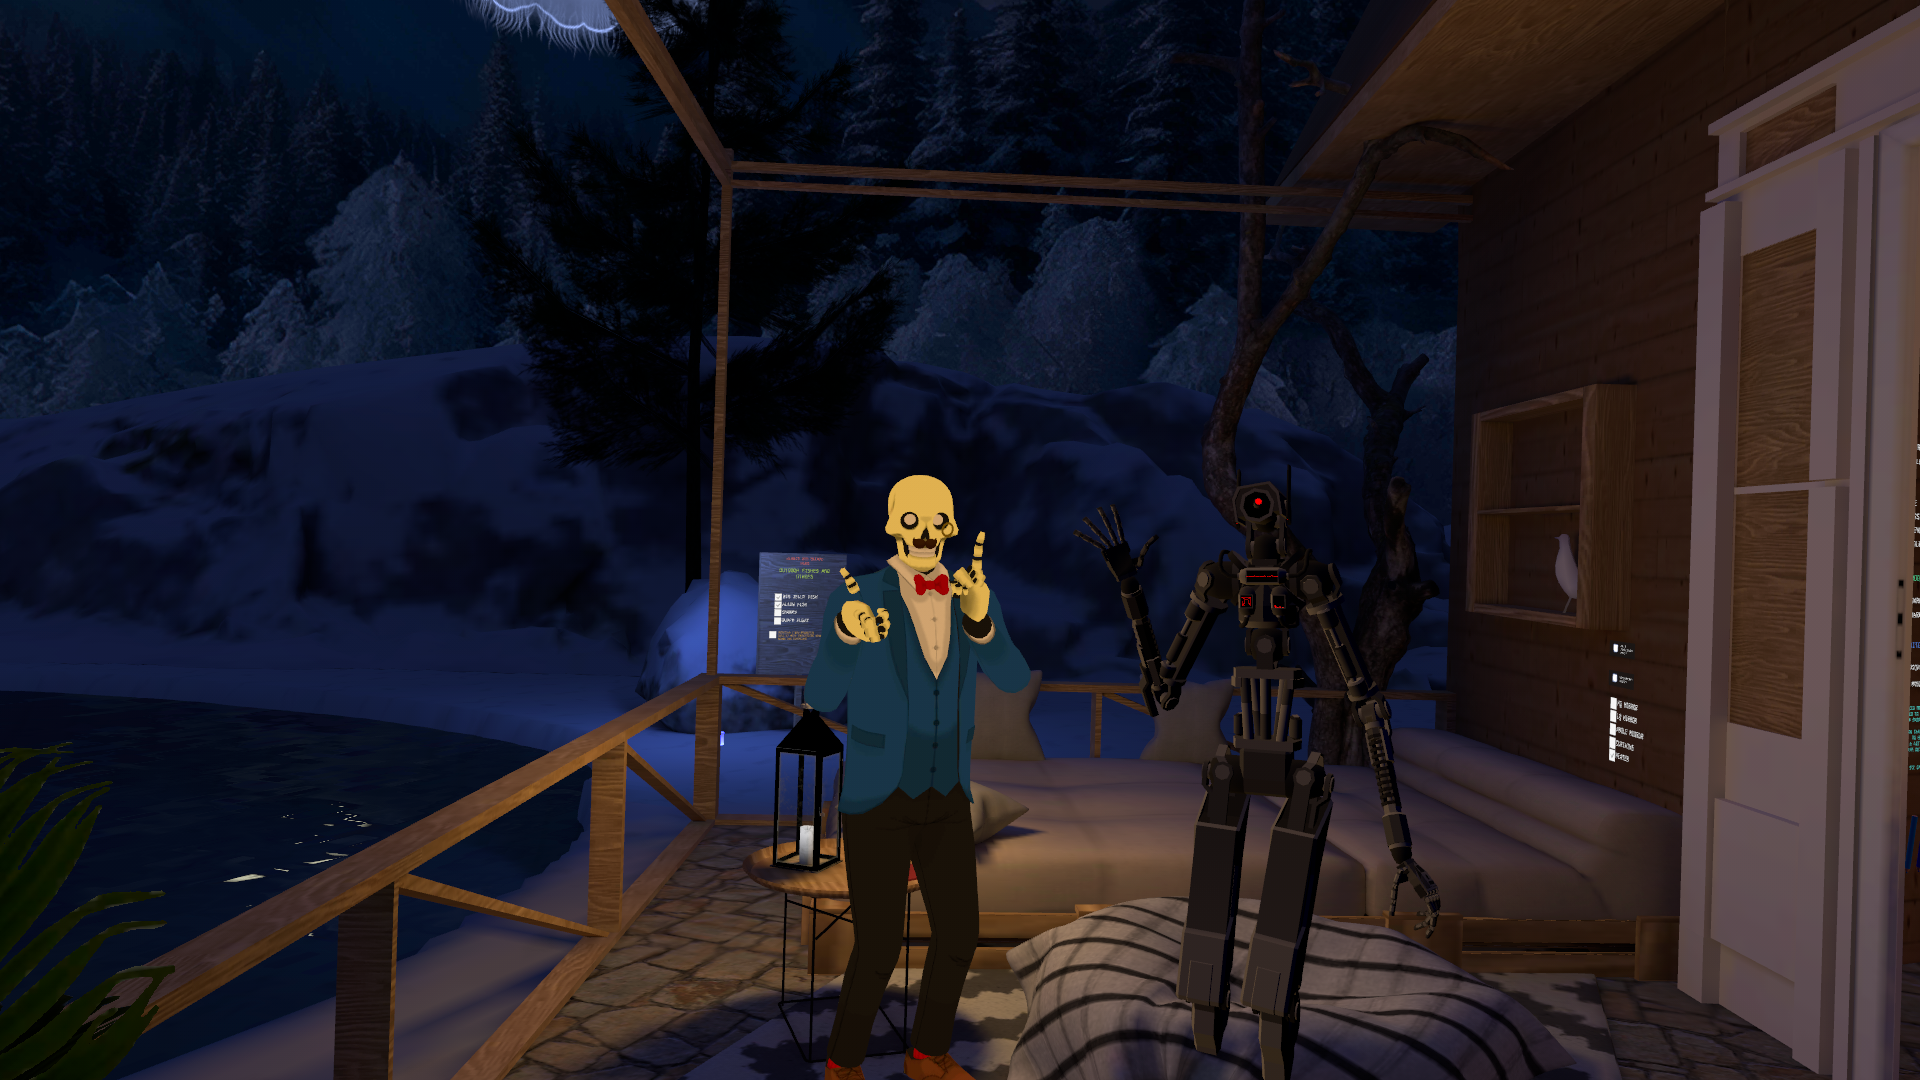 Skeleton and robot standing on a porch at night with snowy scenery in the background.